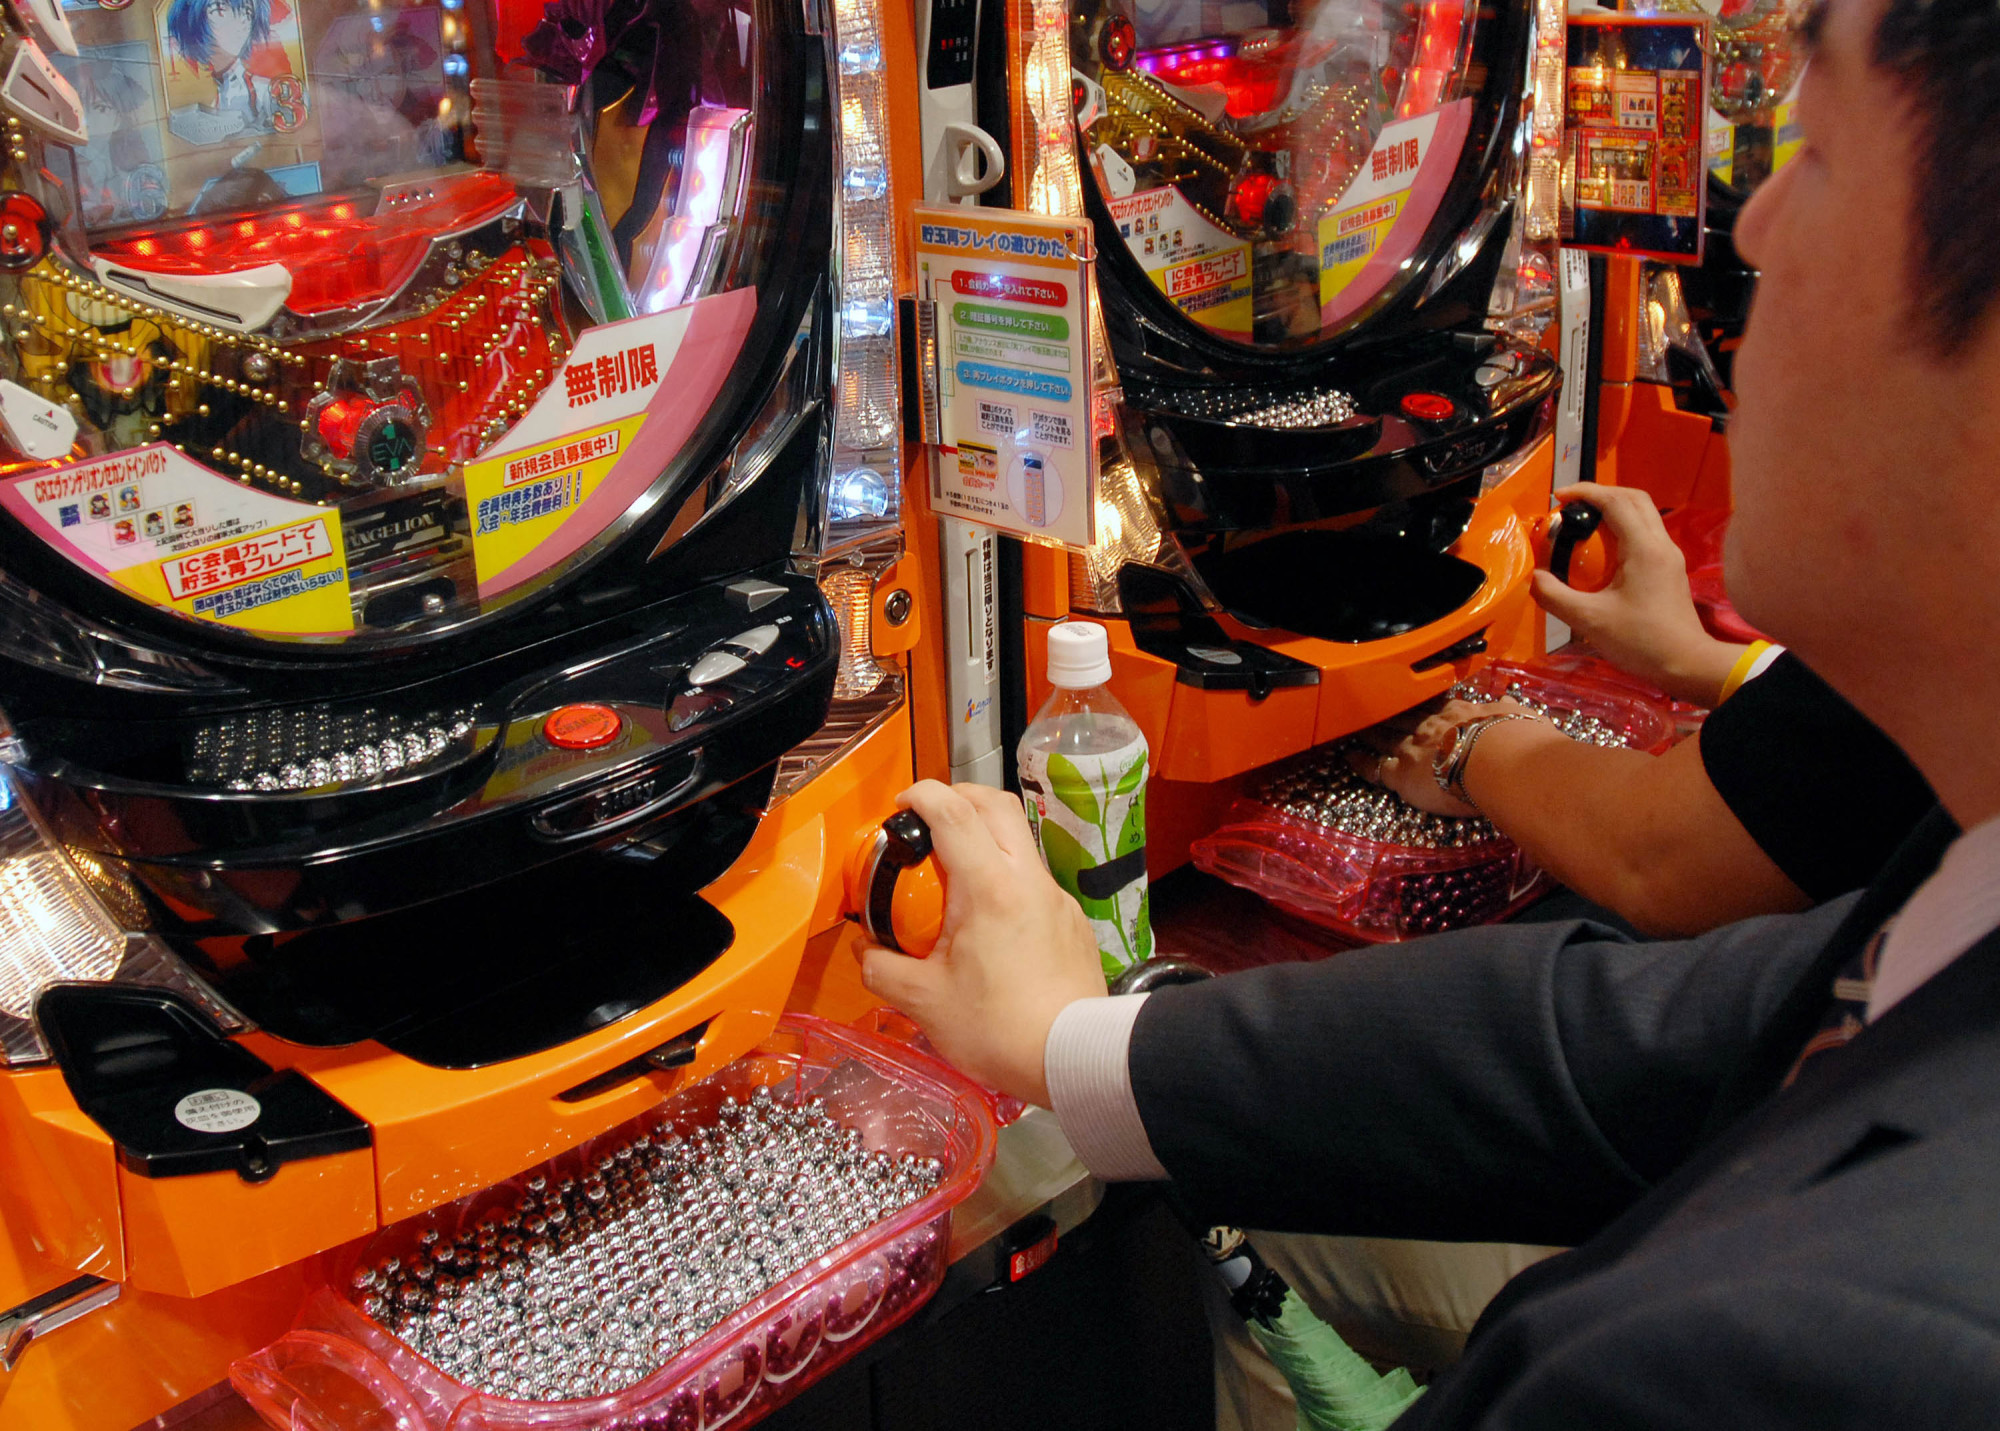 Is Pachinko a source of income for some players?